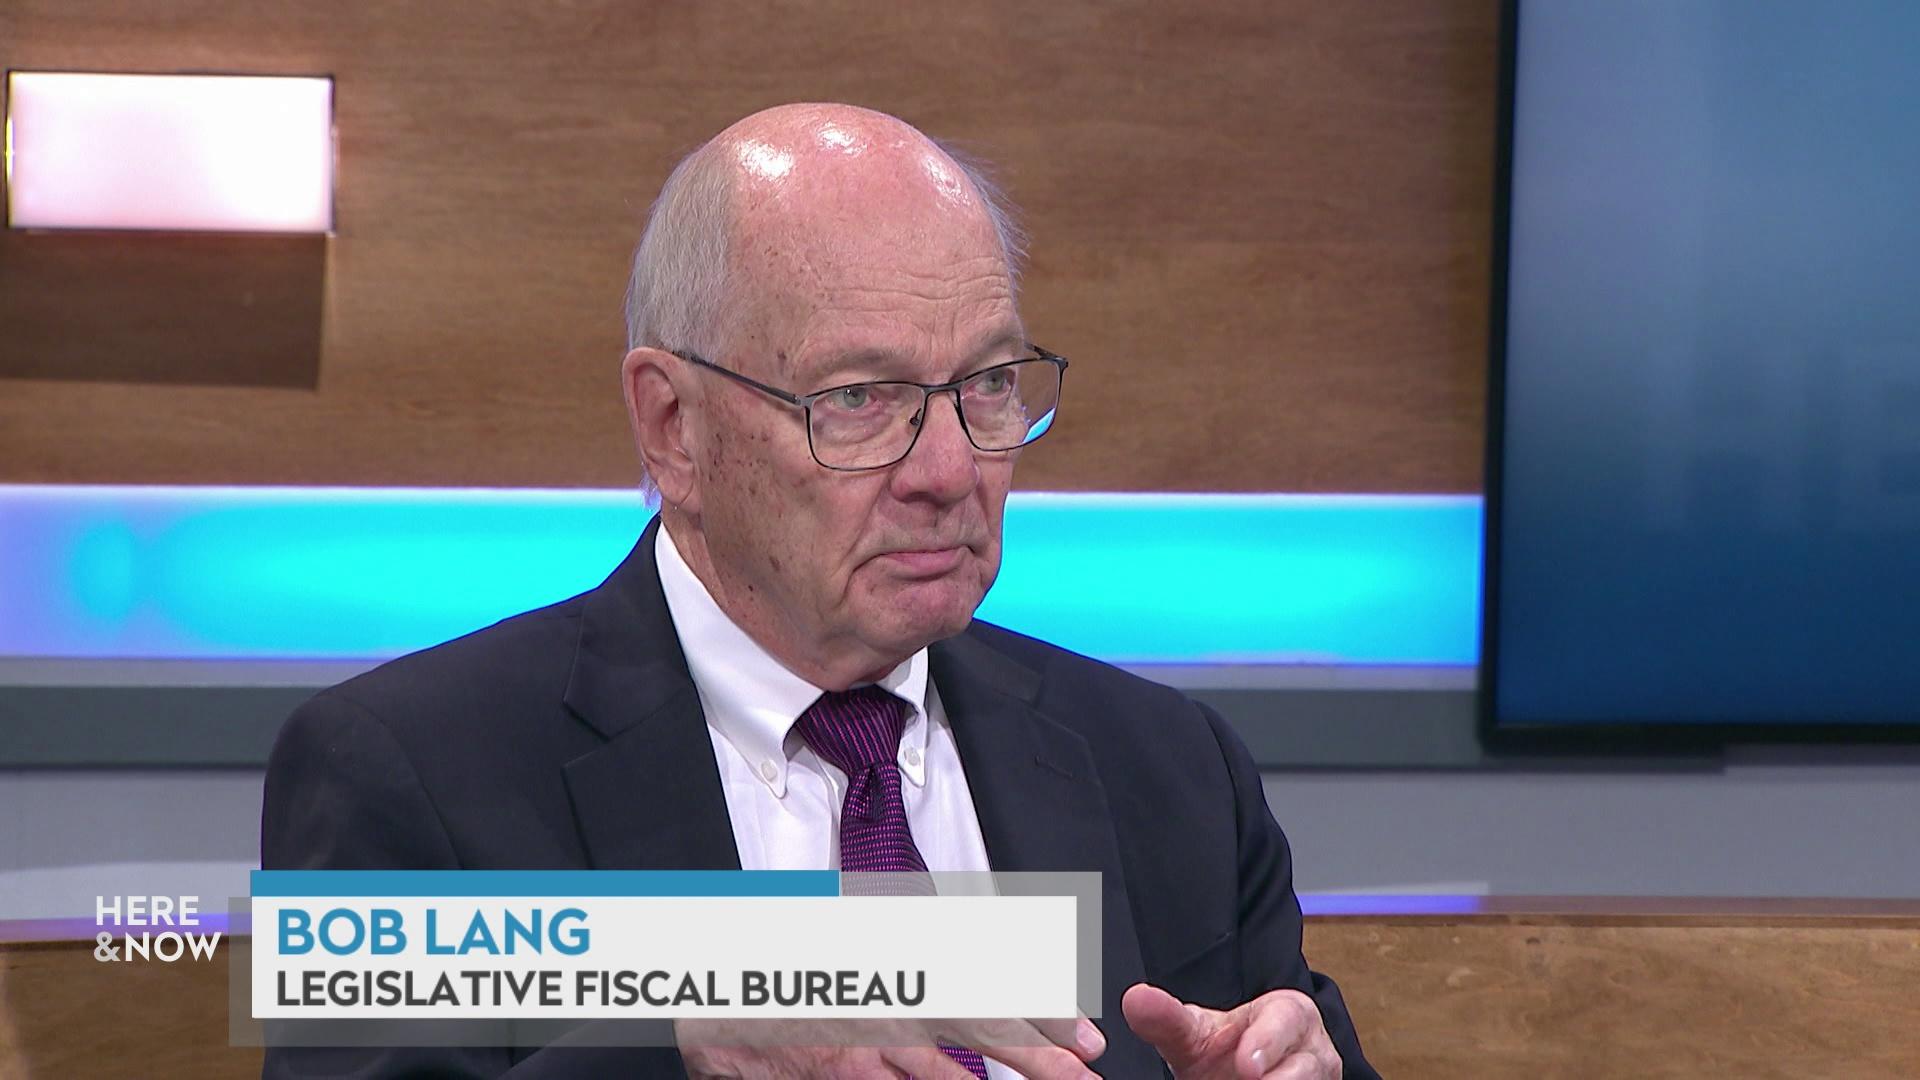 A still image shows Bob Lang seated at the 'Here & Now' set featuring wood paneling, with a graphic at bottom reading 'Bob Lang' and 'Legislative Fiscal Bureau.'